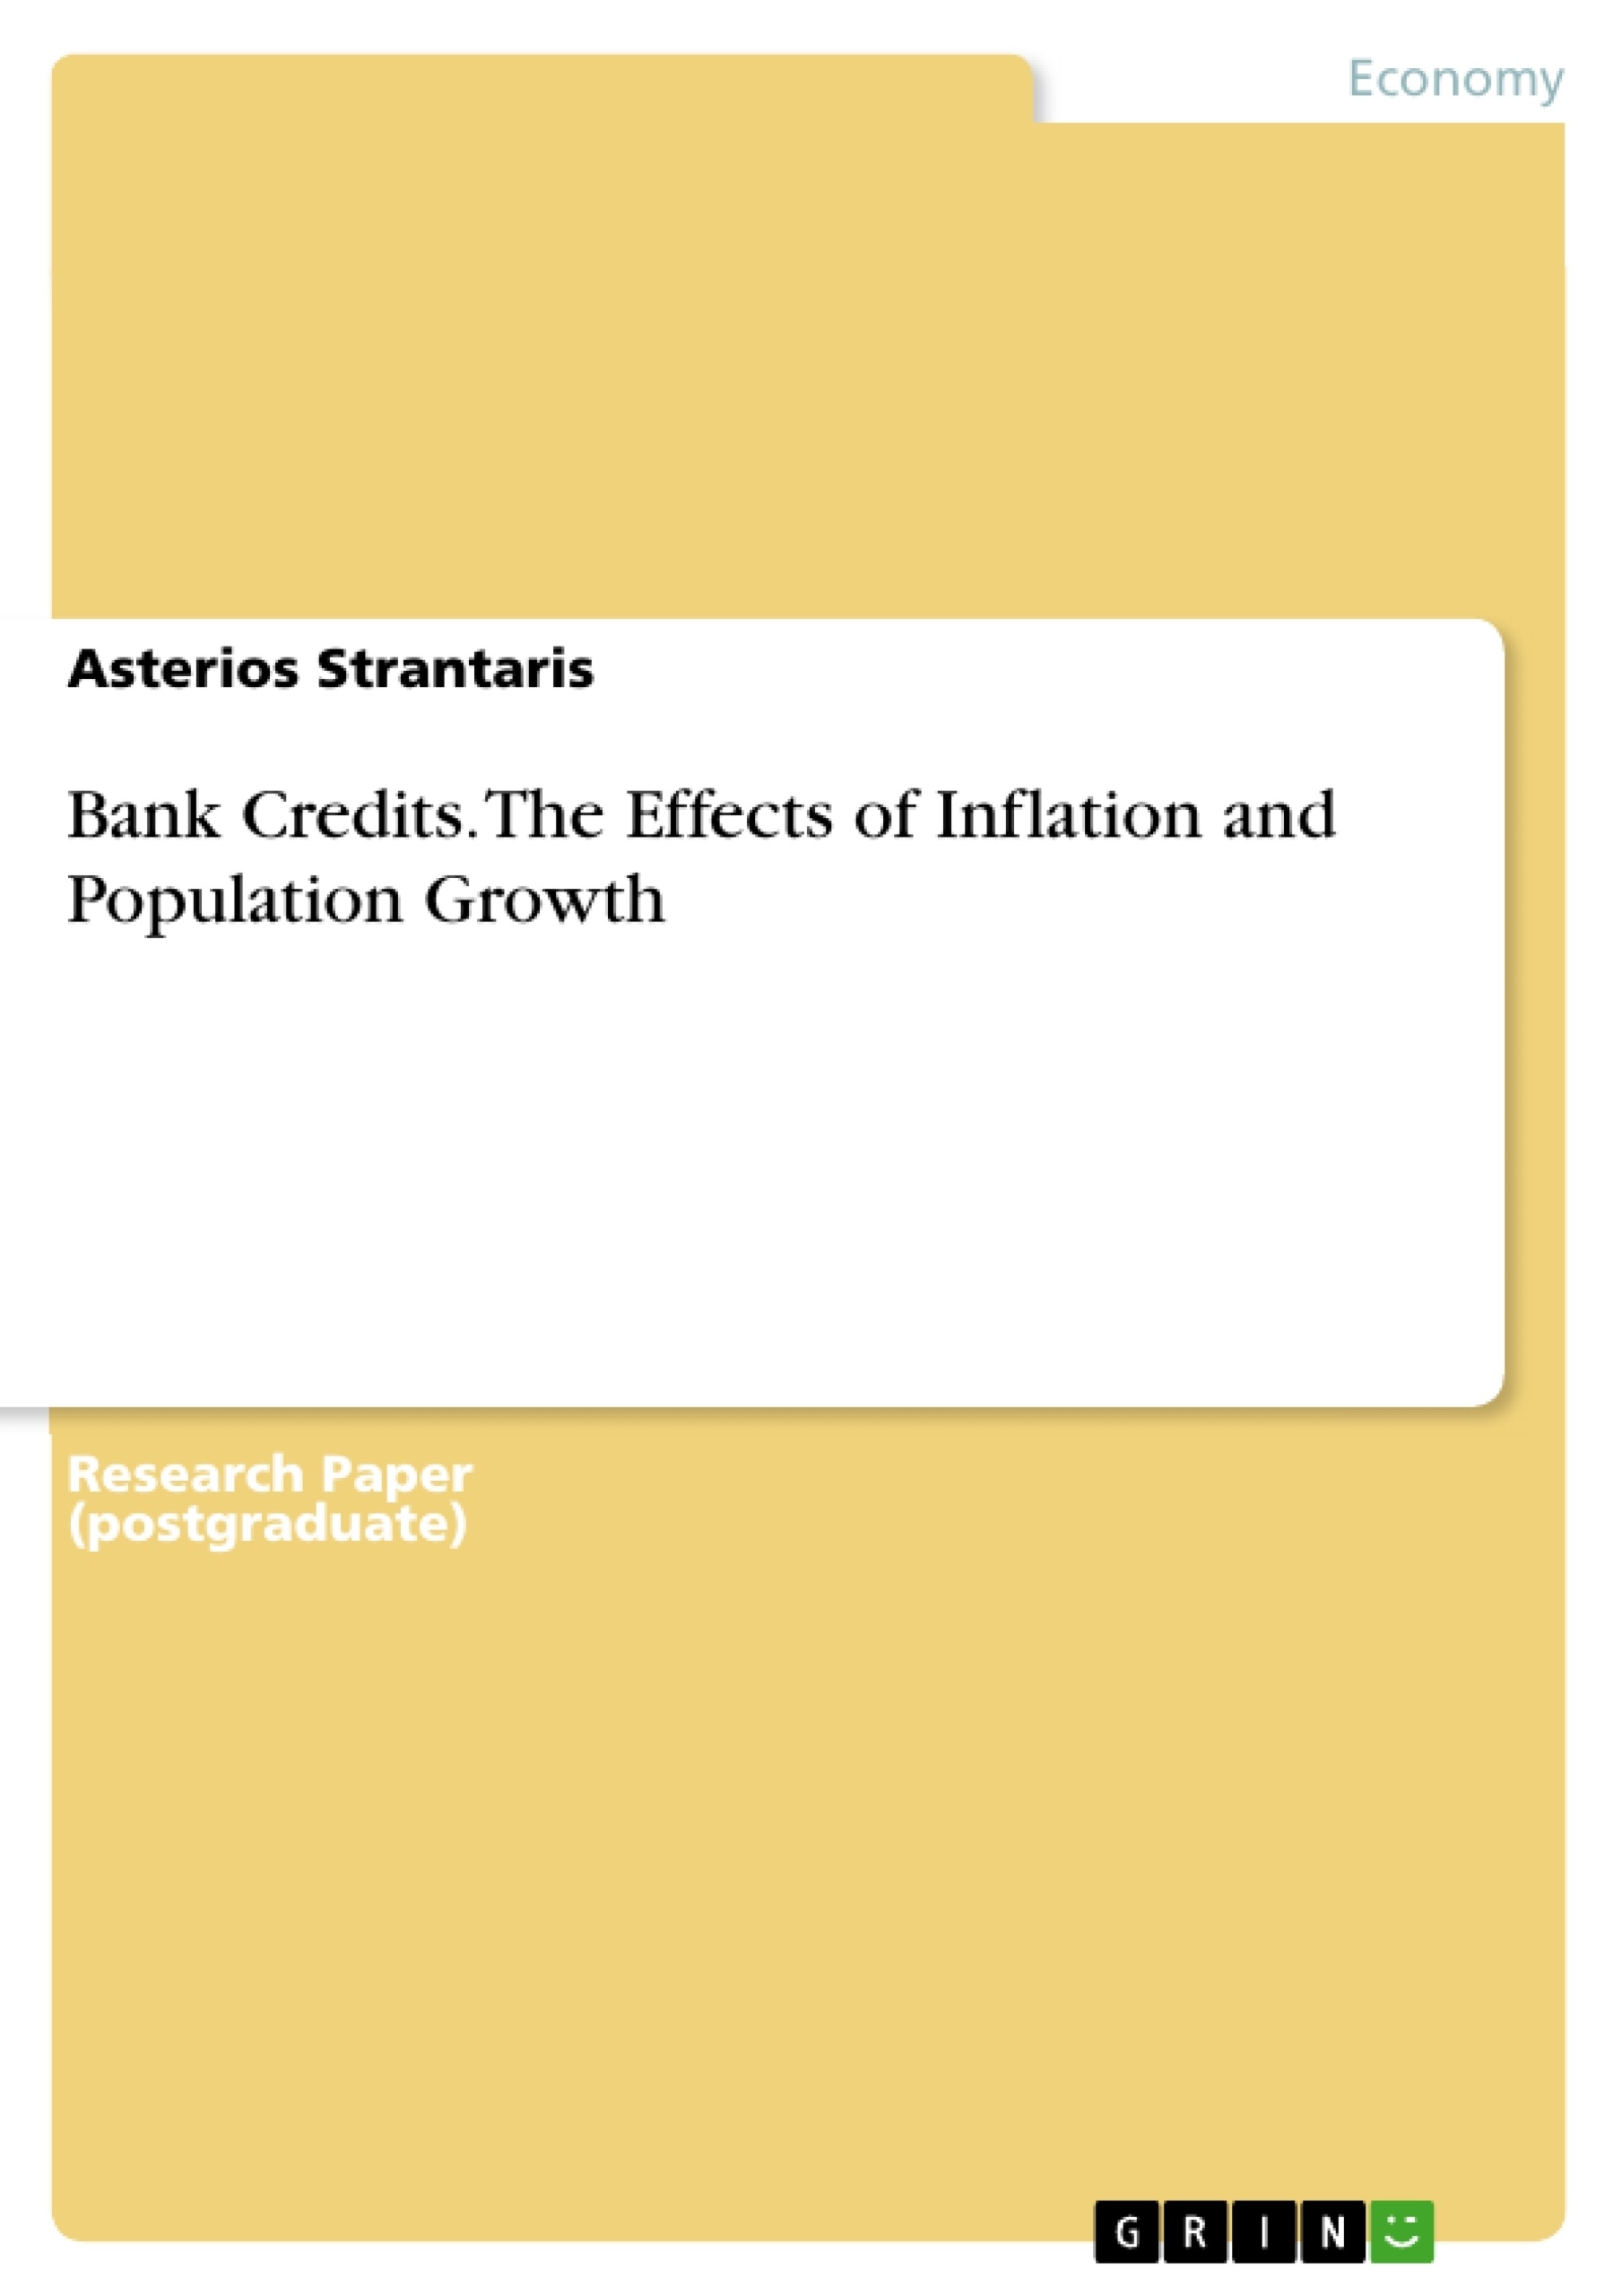 Título: Bank Credits. The Effects of Inflation and Population Growth